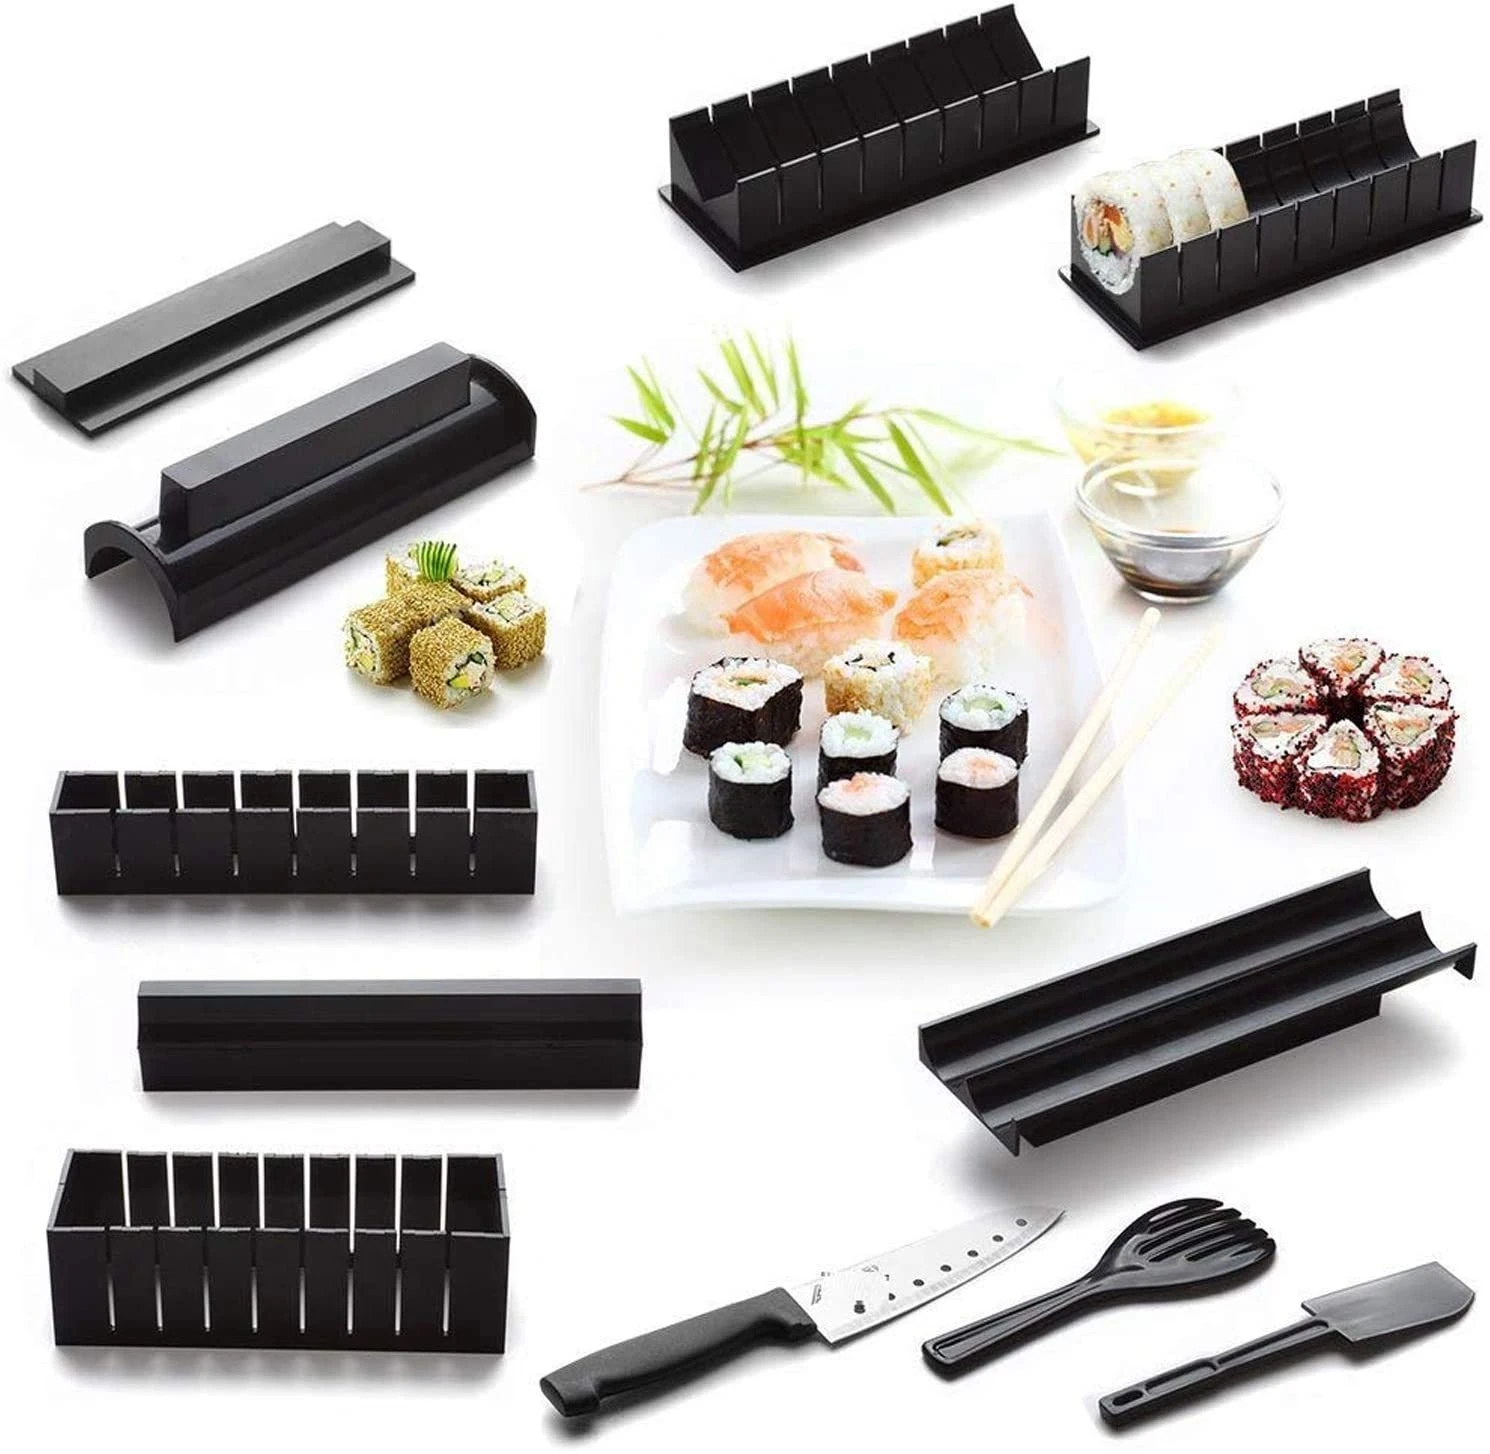 High Quality Plastic Manual Sushi Making Tool Kit with 5 Sushi Roll Molds and Knife